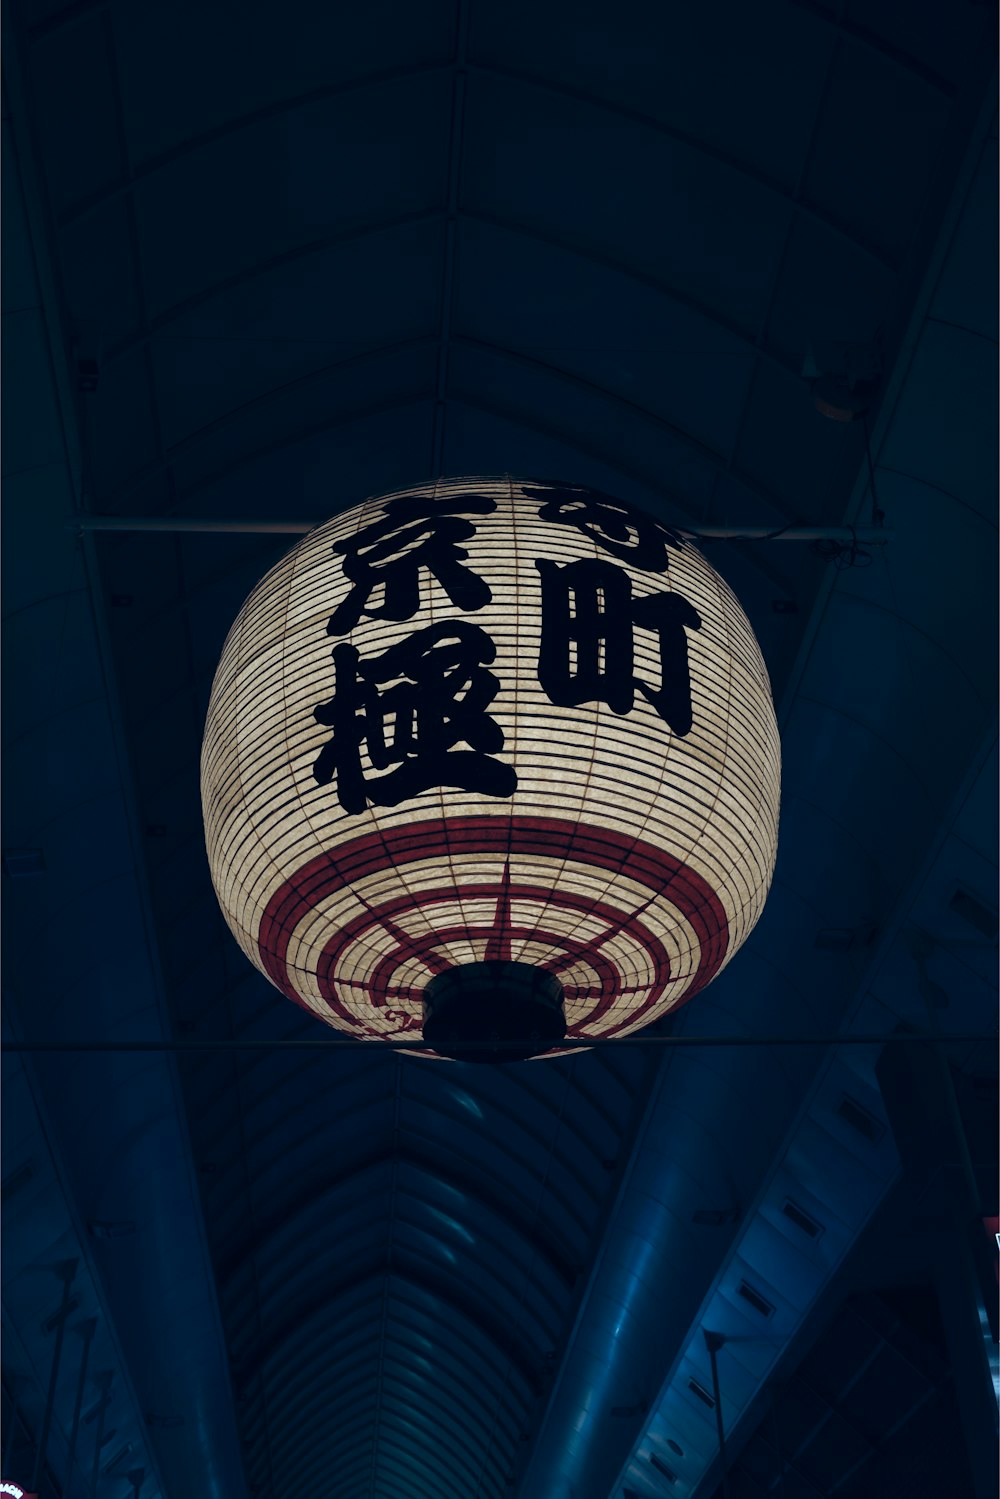 a large lantern hanging from the ceiling of a building